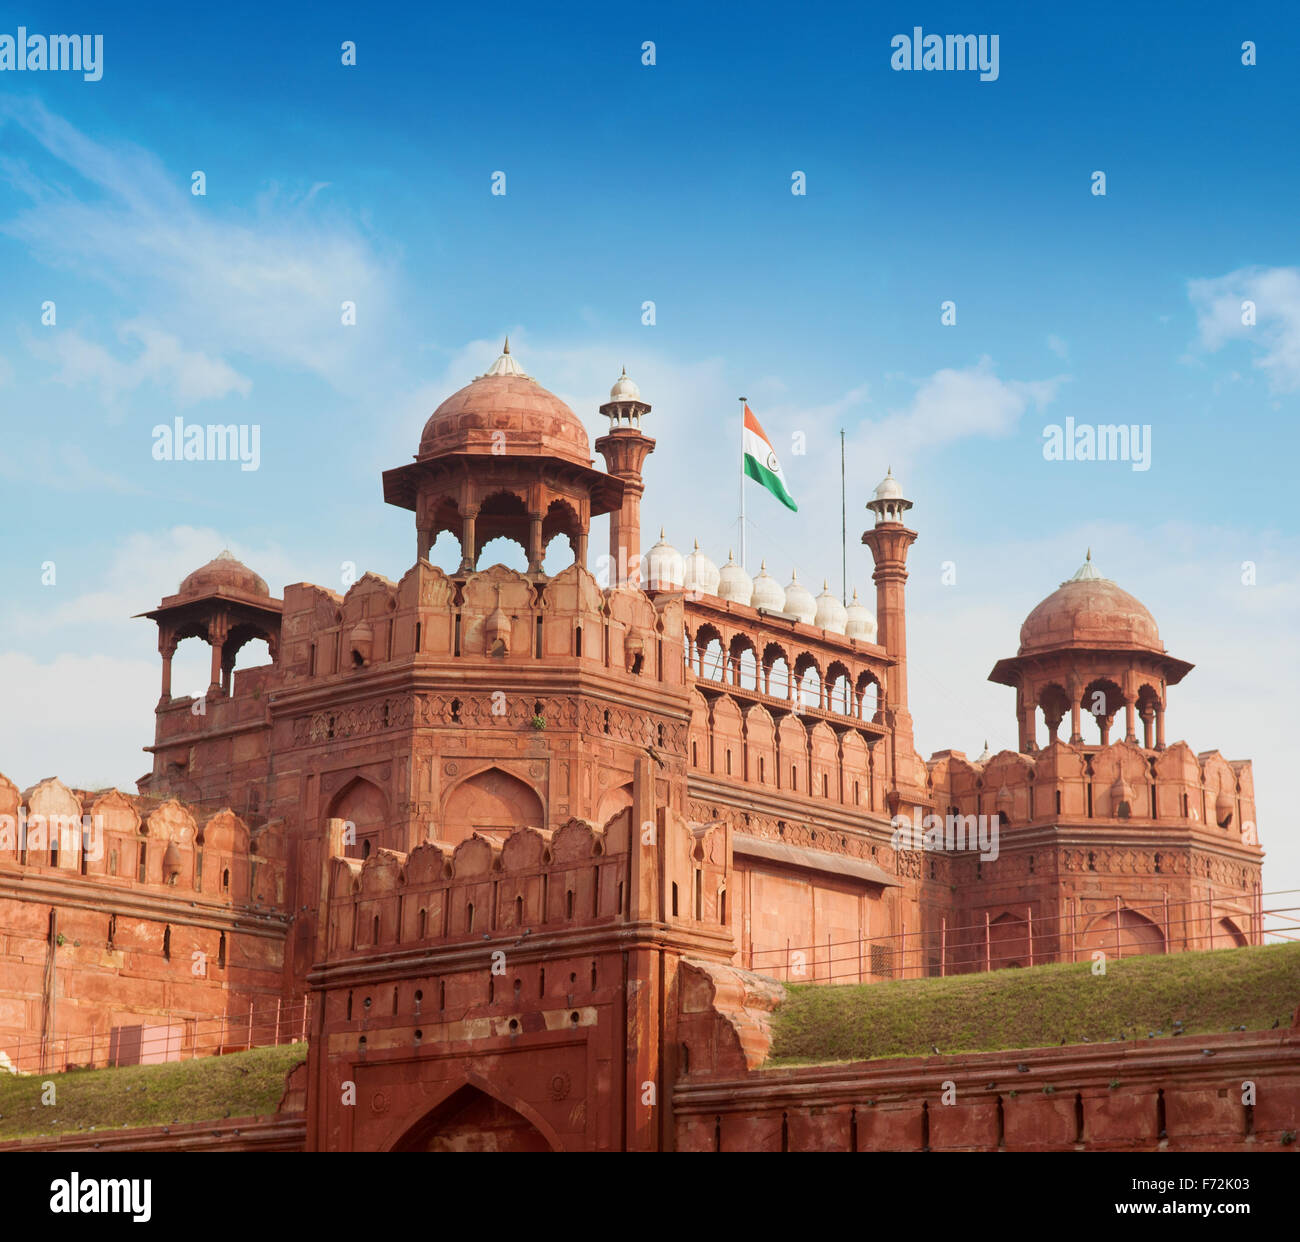 Lal Qila - Red Fort in Delhi, India Stock Photo